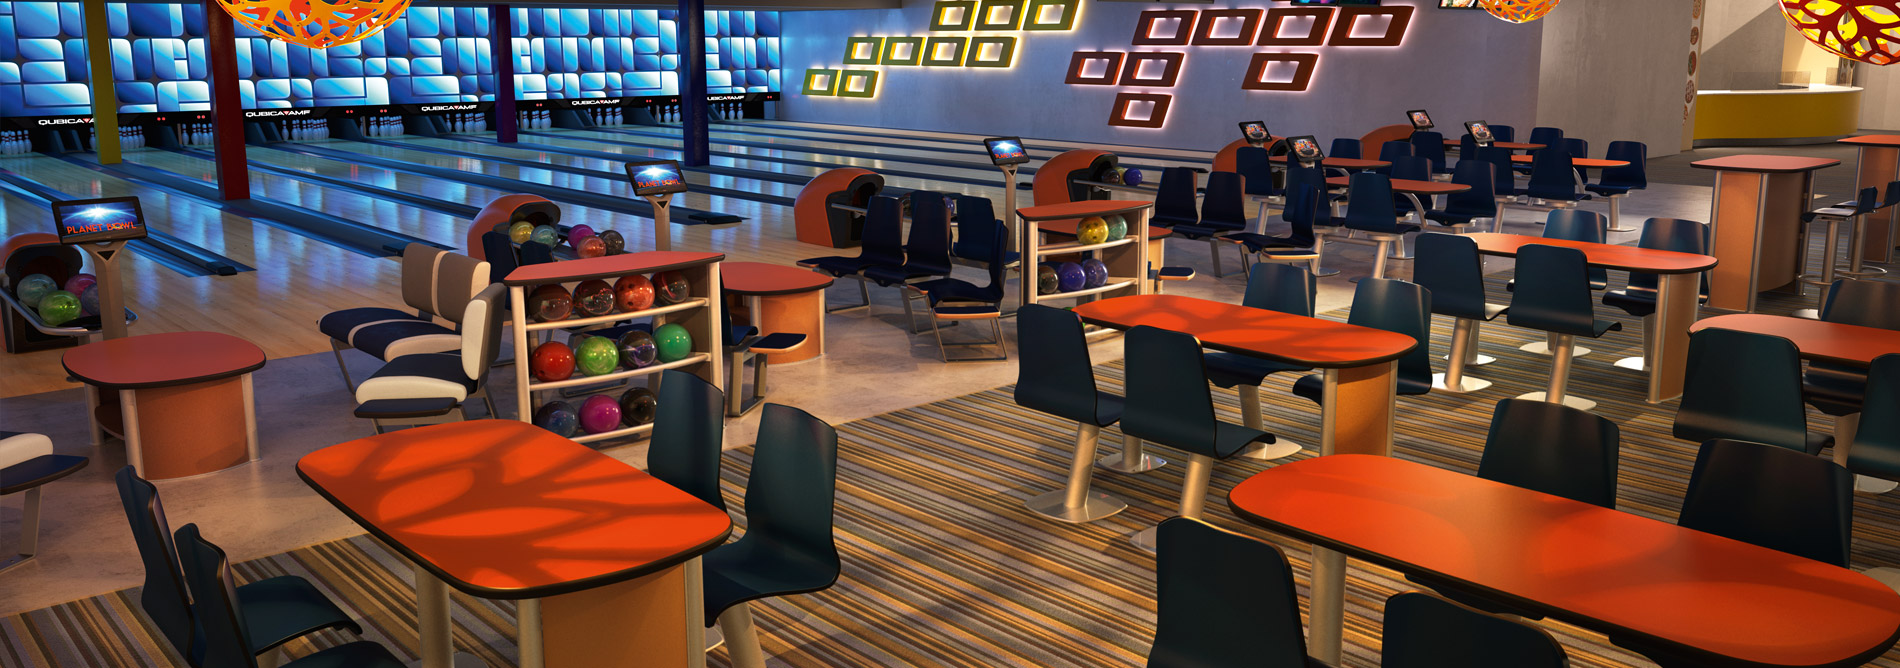 Bowling-QubicaAMF--Bowling-QubicaAMF-furniture-harmony-design-styles-banner.jpg